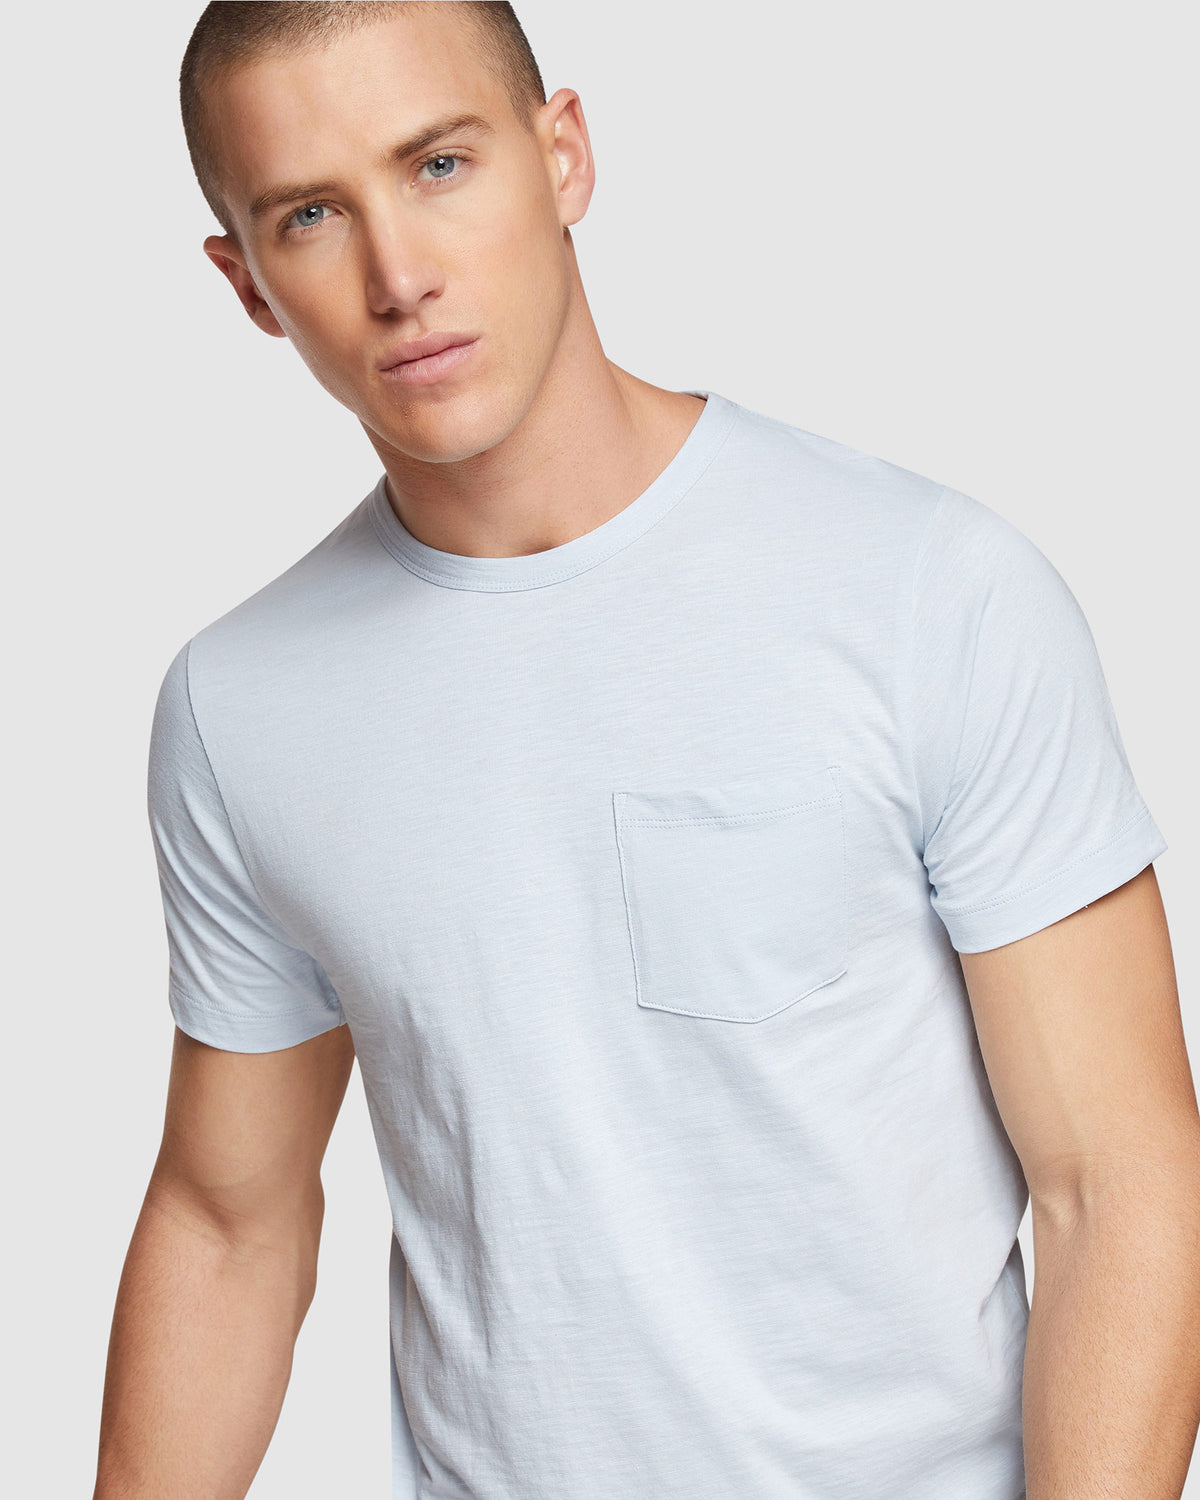 ELVIS T-SHIRT WITH CHEST POCKET